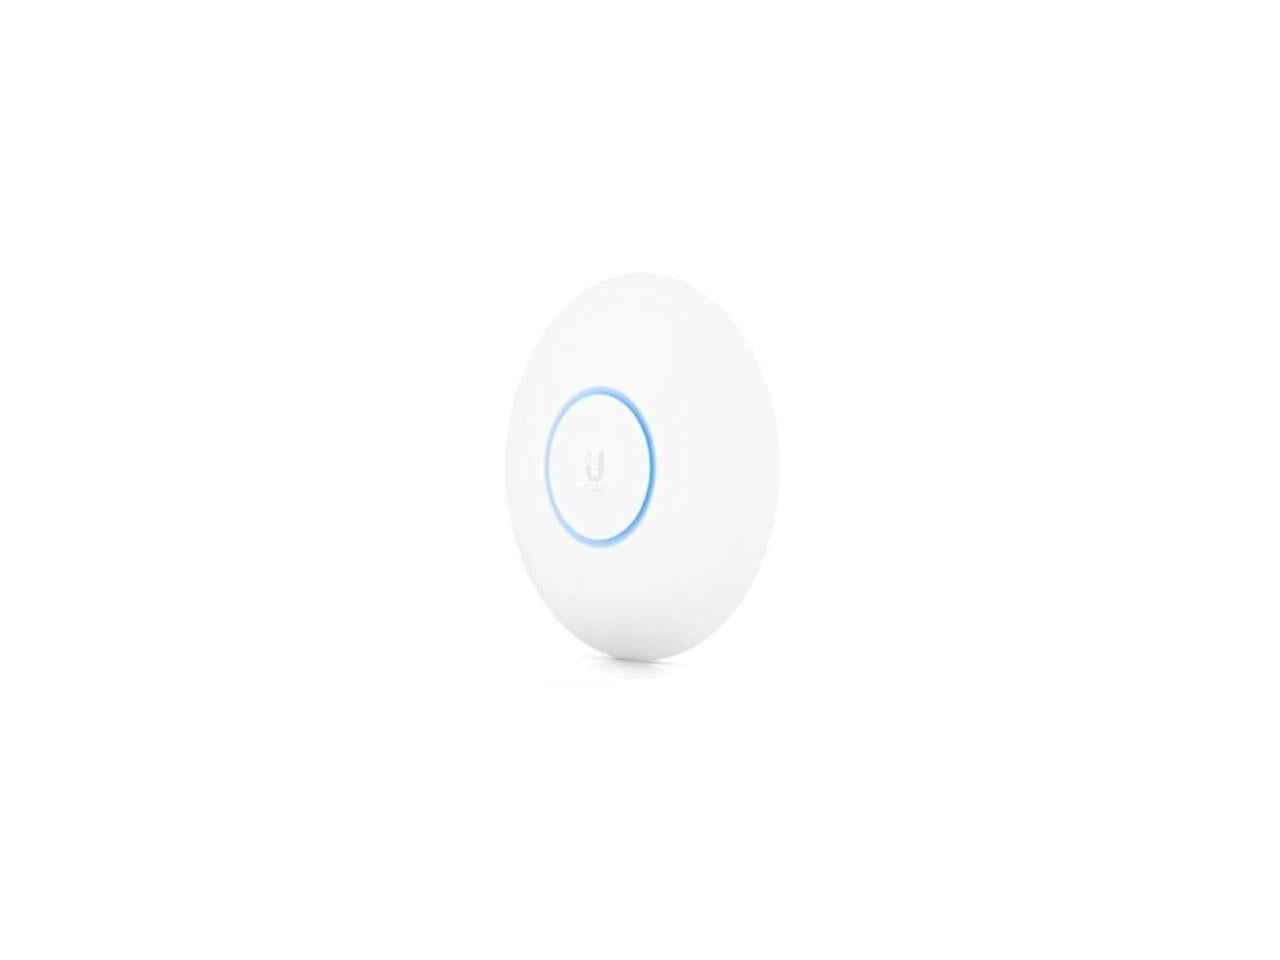 [Besonderheit, Qualitätsprodukte] Ubiquiti | 2.4 U6 Band Access WiFi Gbps, | Gen Professional Indoor Client Band 4.8 WiFi Rate Steel | Mbps SGCC Pro 300 UniFi Band 5GHz Up 6 to White GHz Plastic, Point 573.5 | | Dual Throughput 